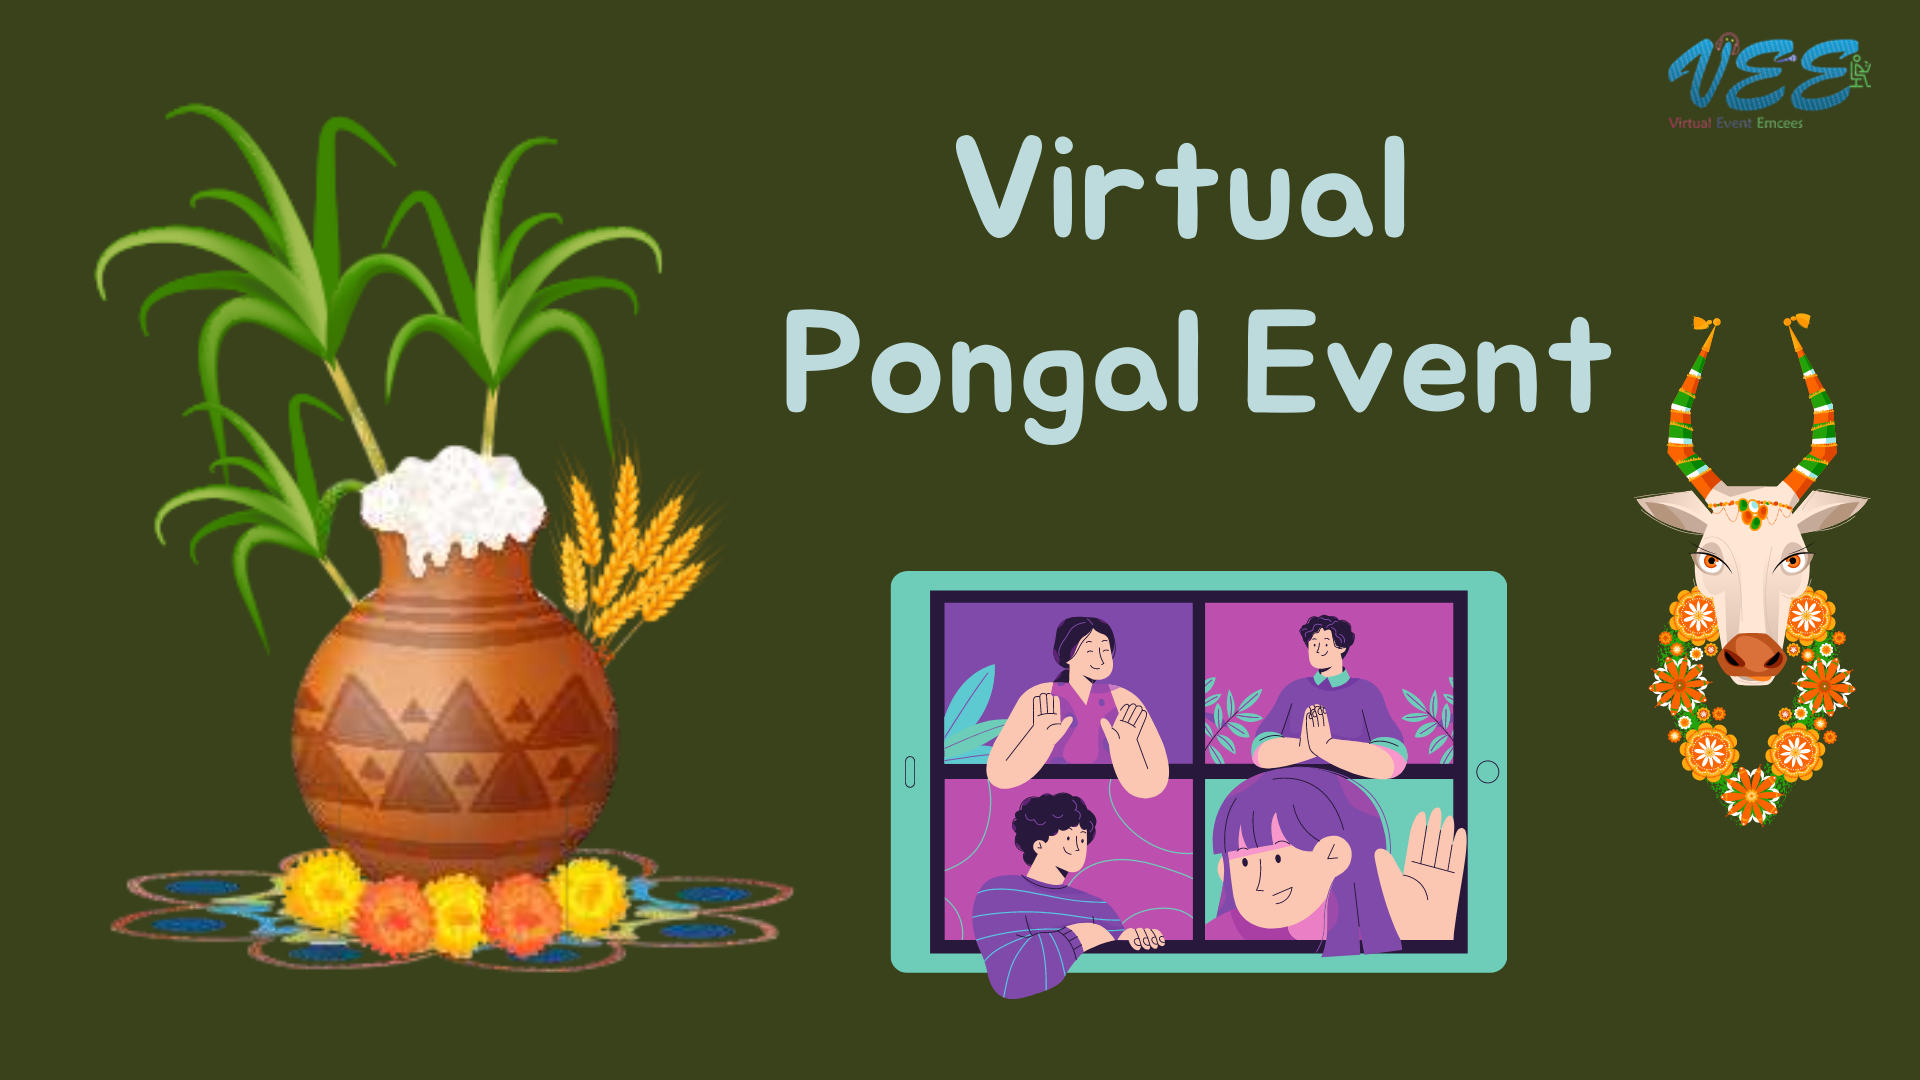 Event Plan for Virtual Pongal Event